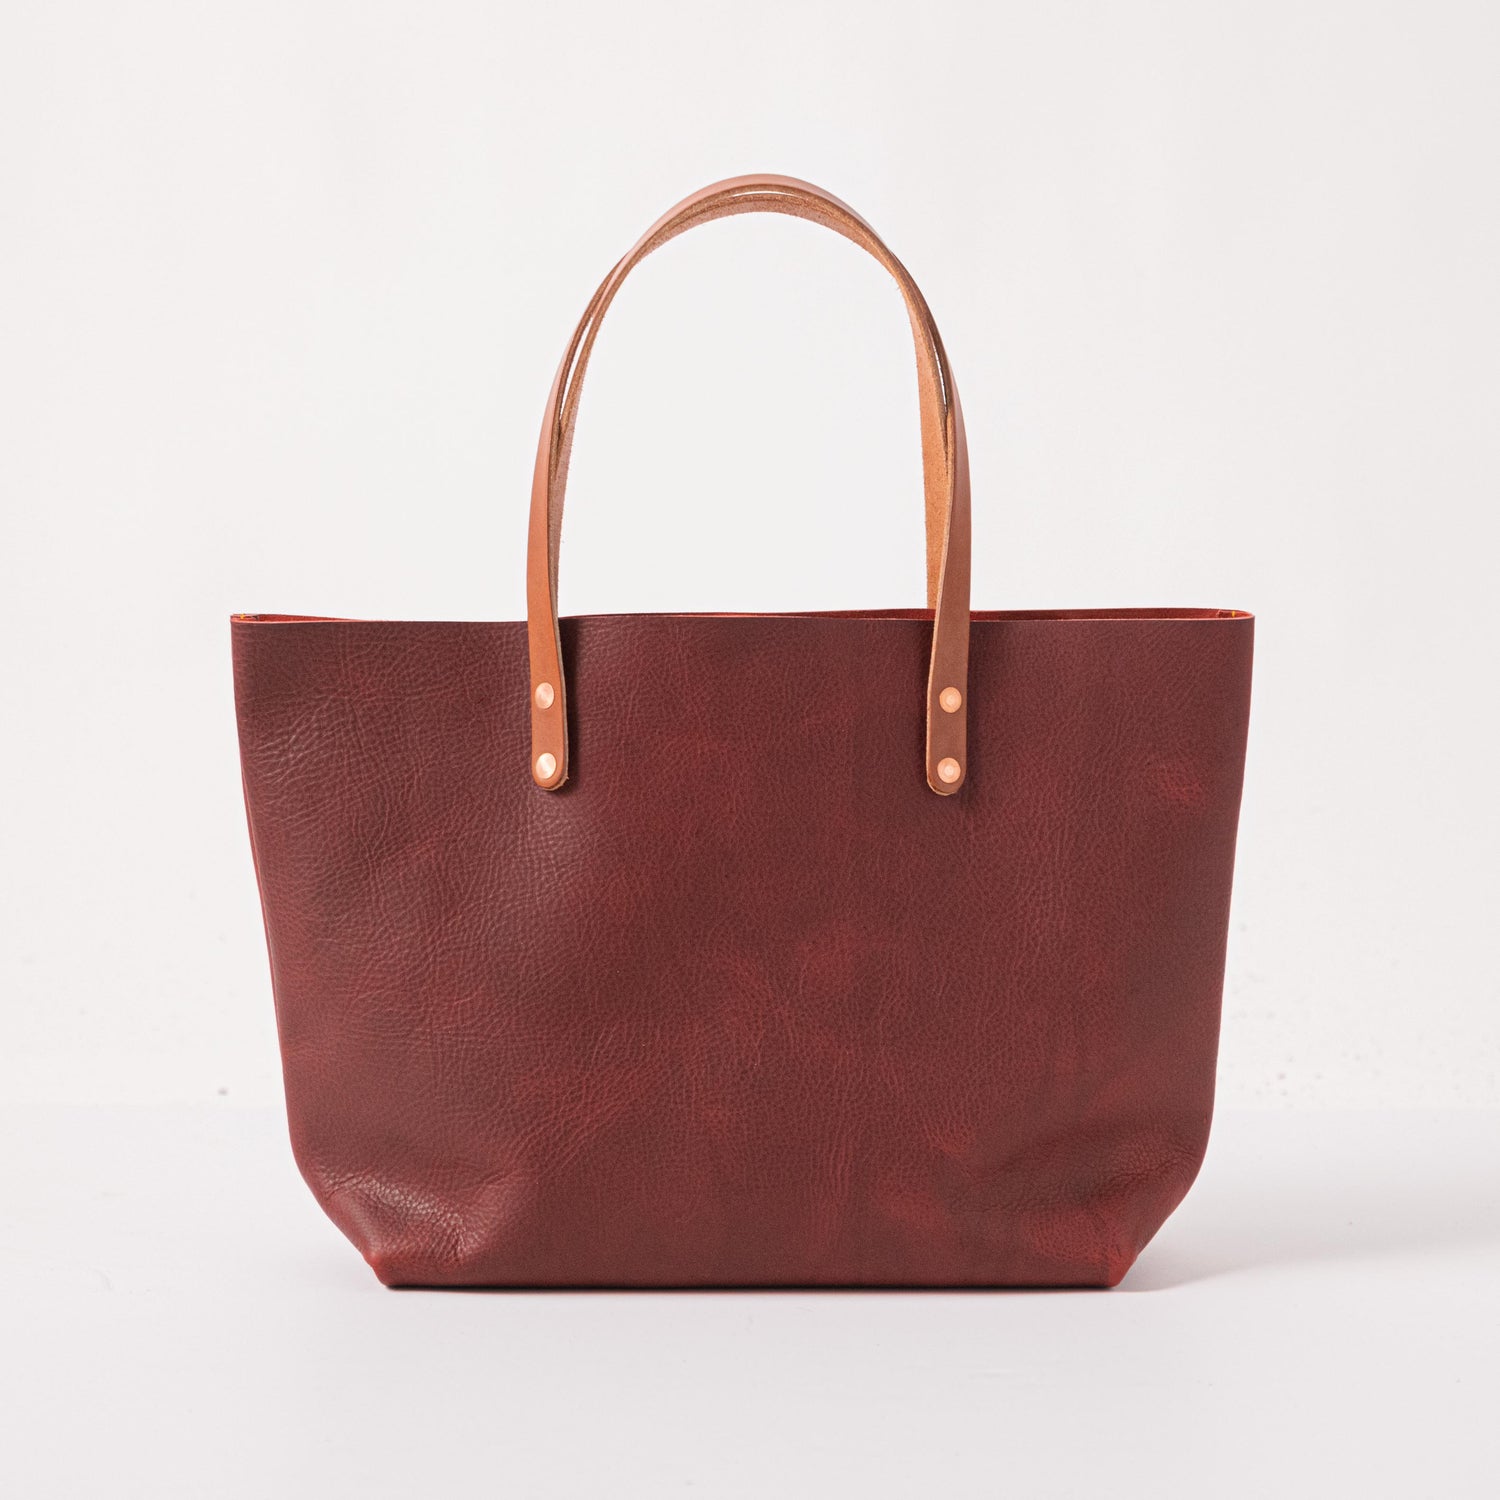 KMM & Co.  Leather tote bags, wallets, and more made in America